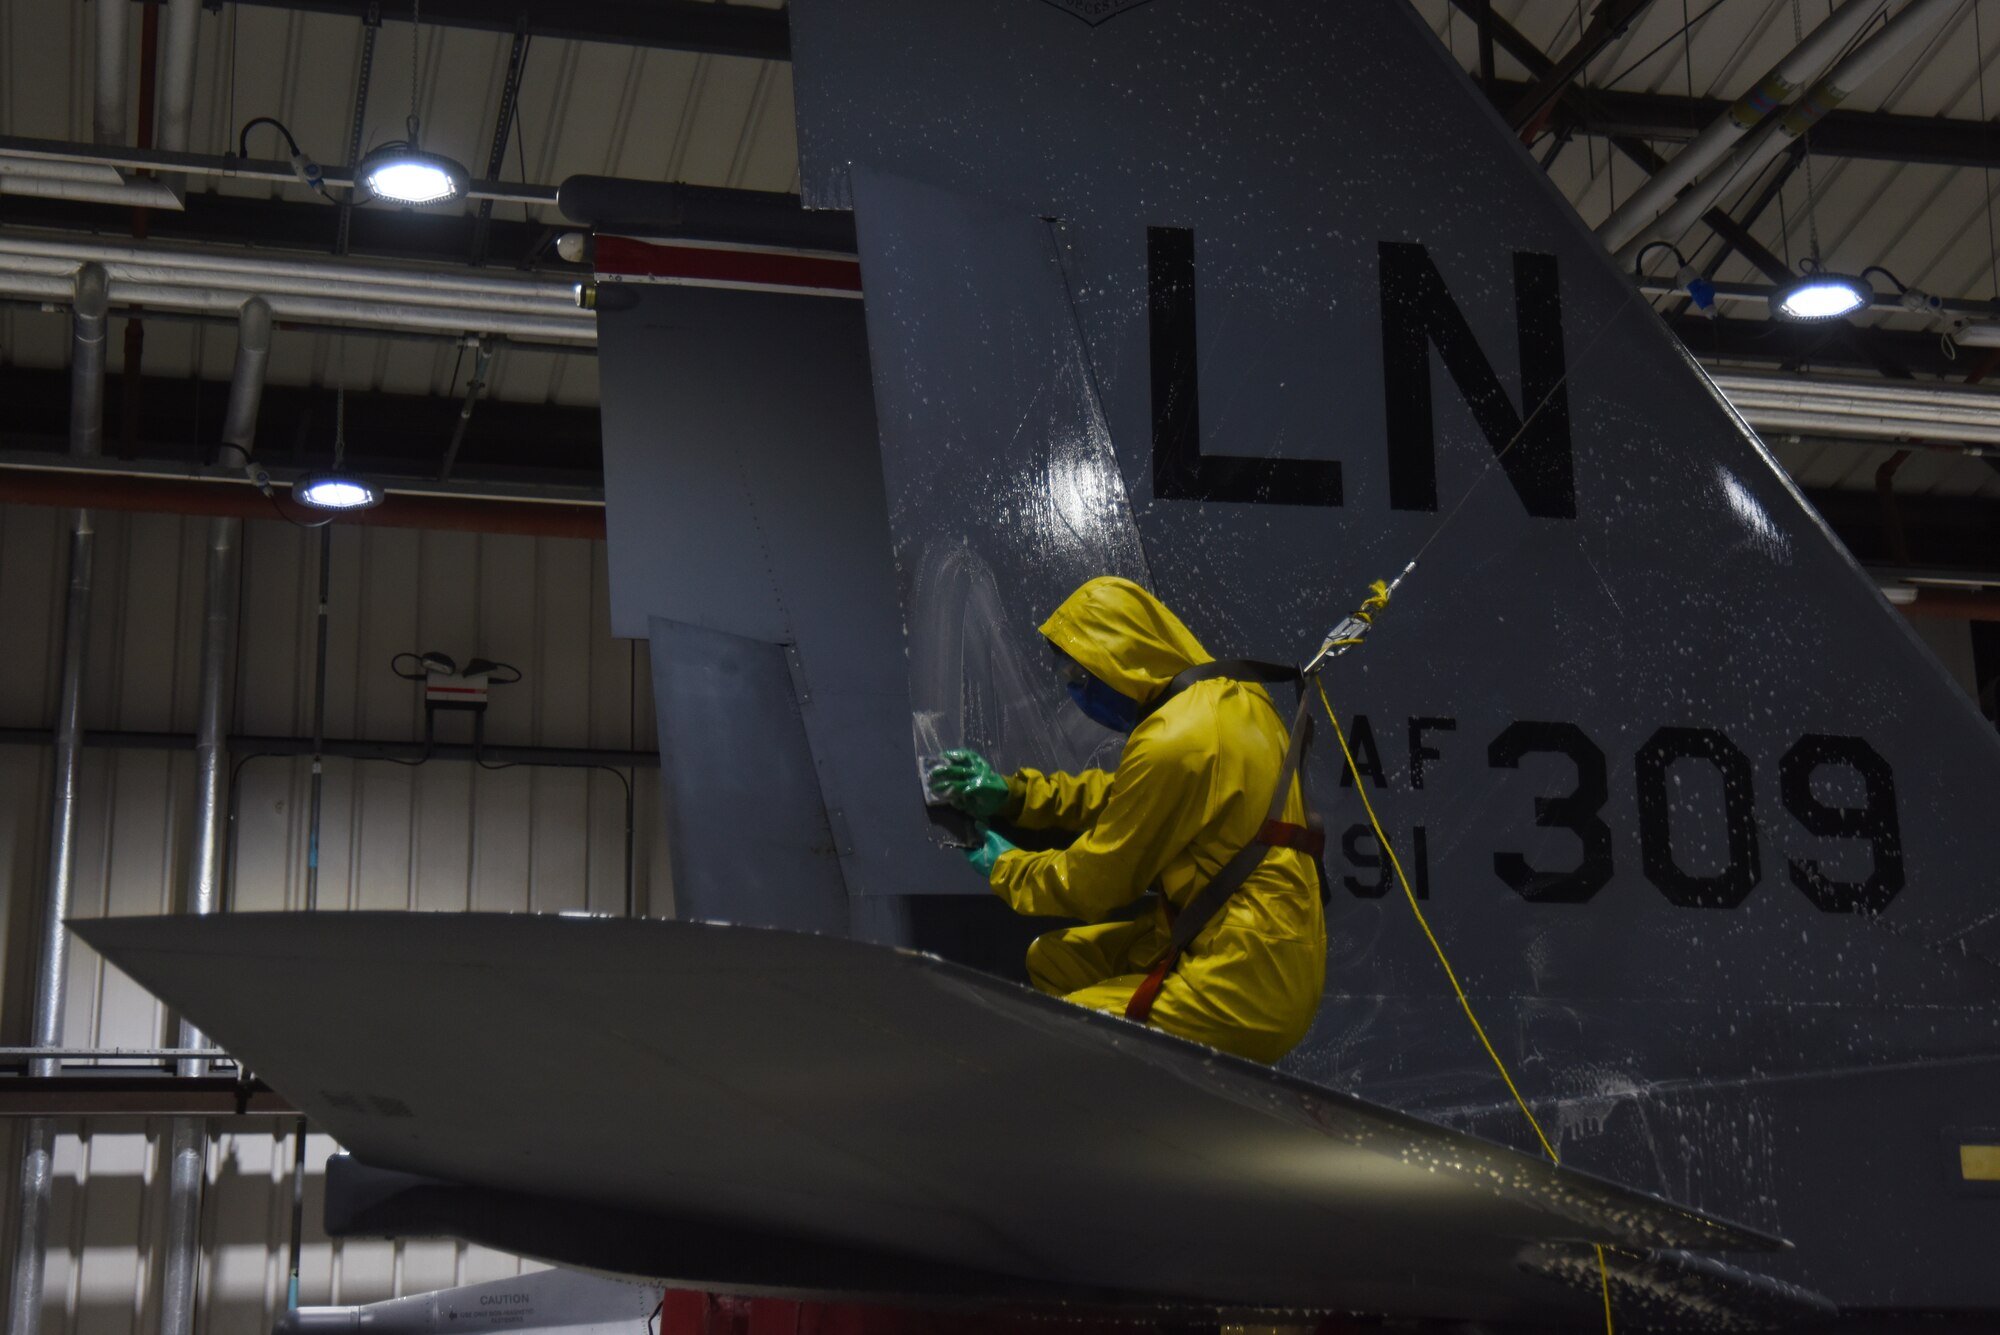 A 494th Aircraft Maintenance Unit crew chief washes a 494th Fighter Squadron F-15E Strike Eagle at Royal Air Force Lakenheath, England, March 13. After the aircraft is washed, the paint is inspected to make sure there are no areas that need to be touched up. The paint helps seal the metal and prevent corrosion. (U.S. Air Force photo/Senior Airman Abby L. Finkel)